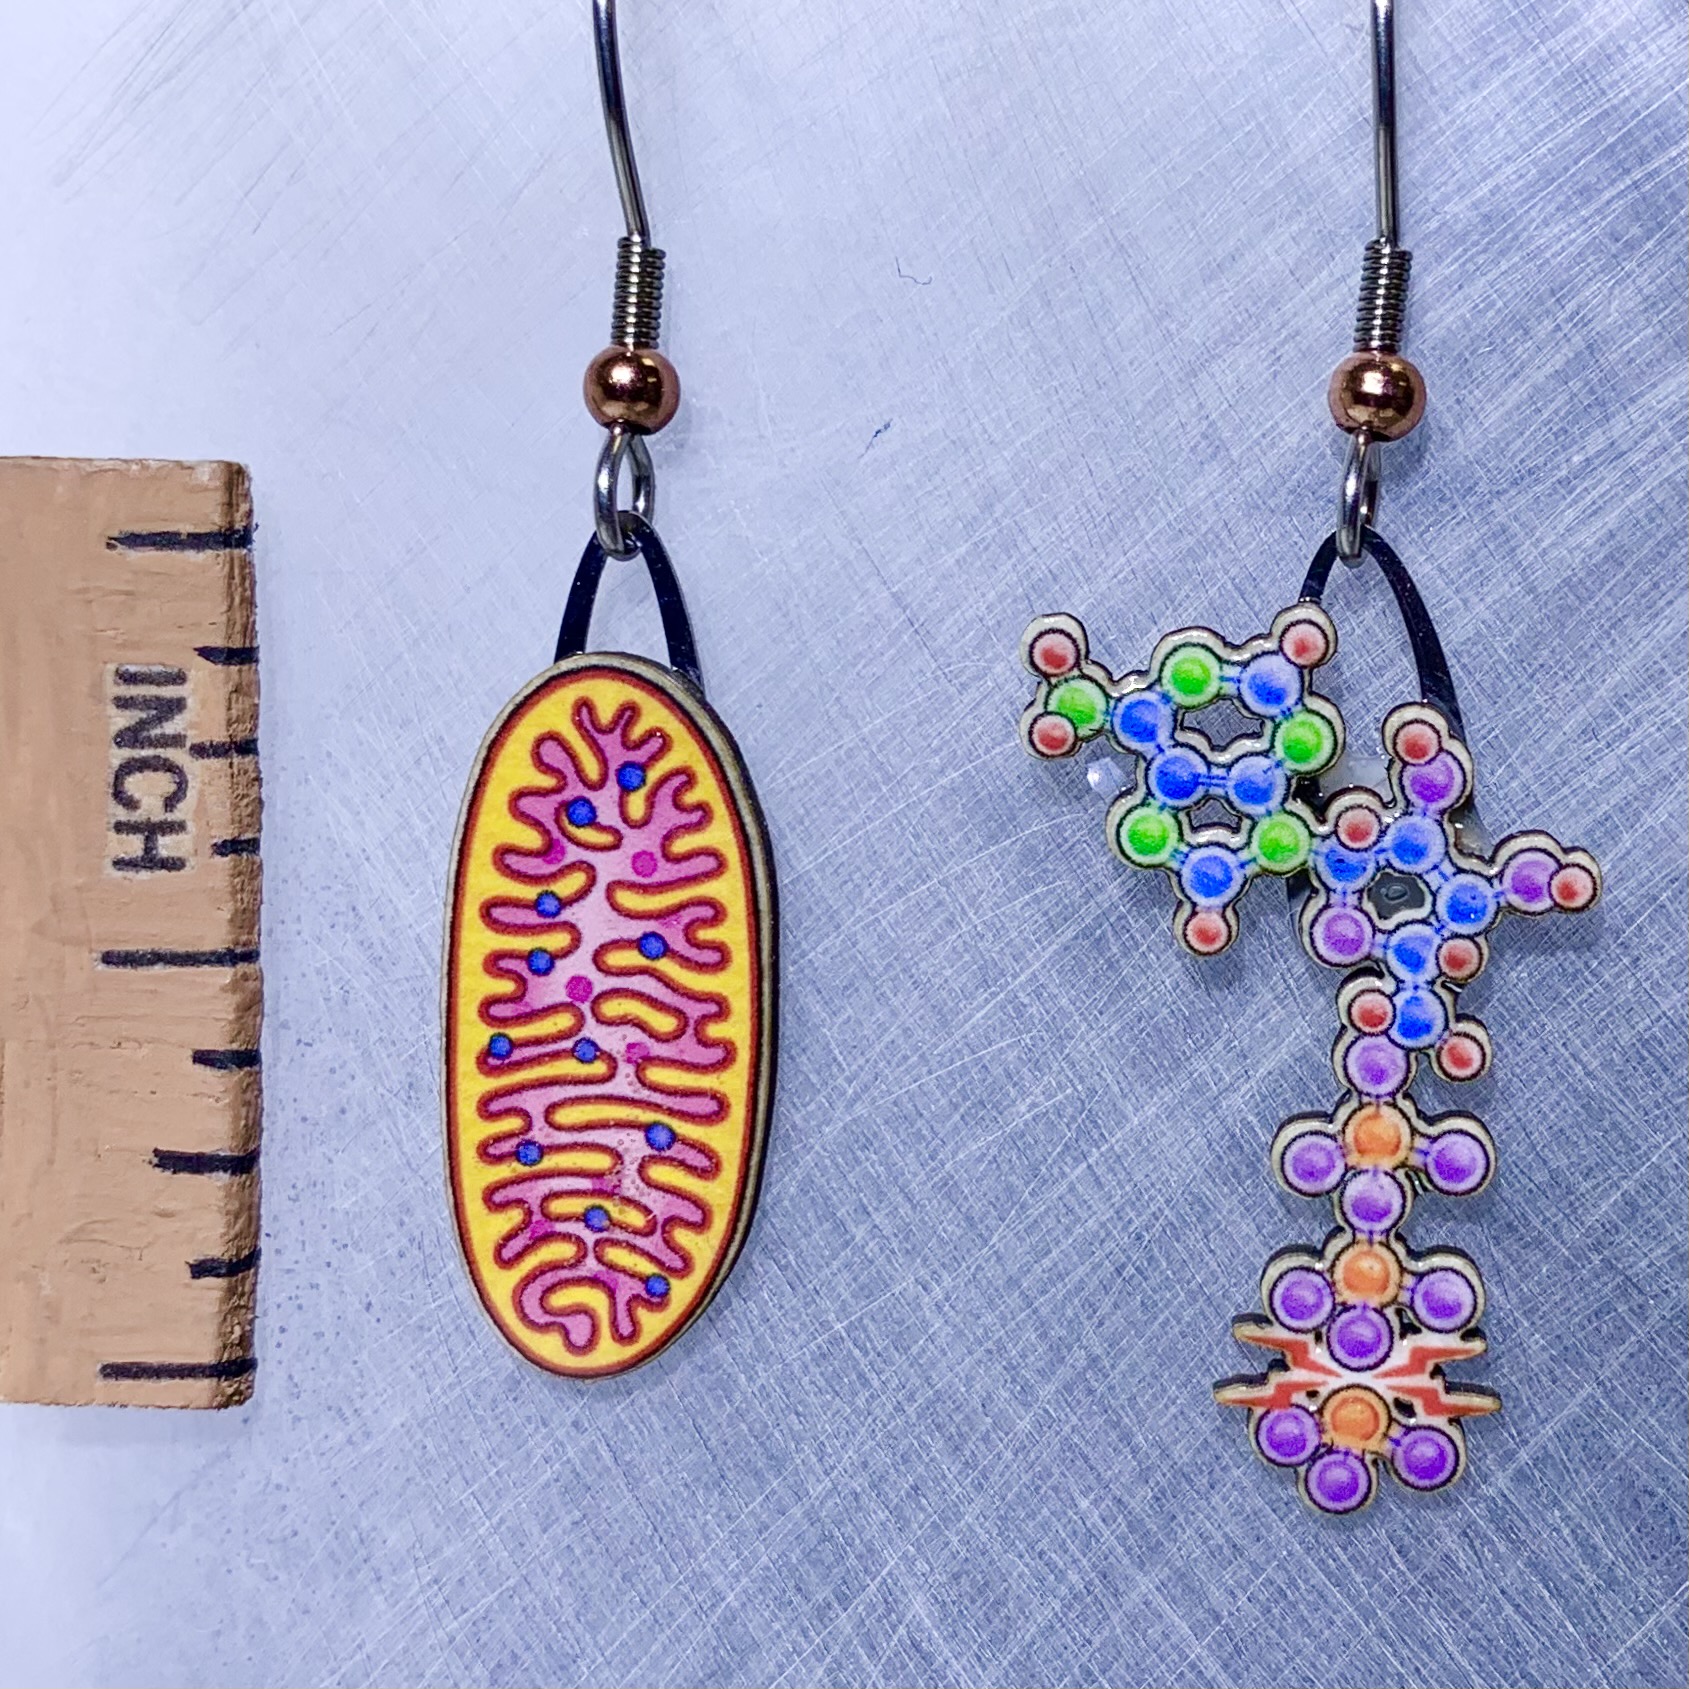 Picture shown is of 1 inch tall pair of earrings of Metabolism.